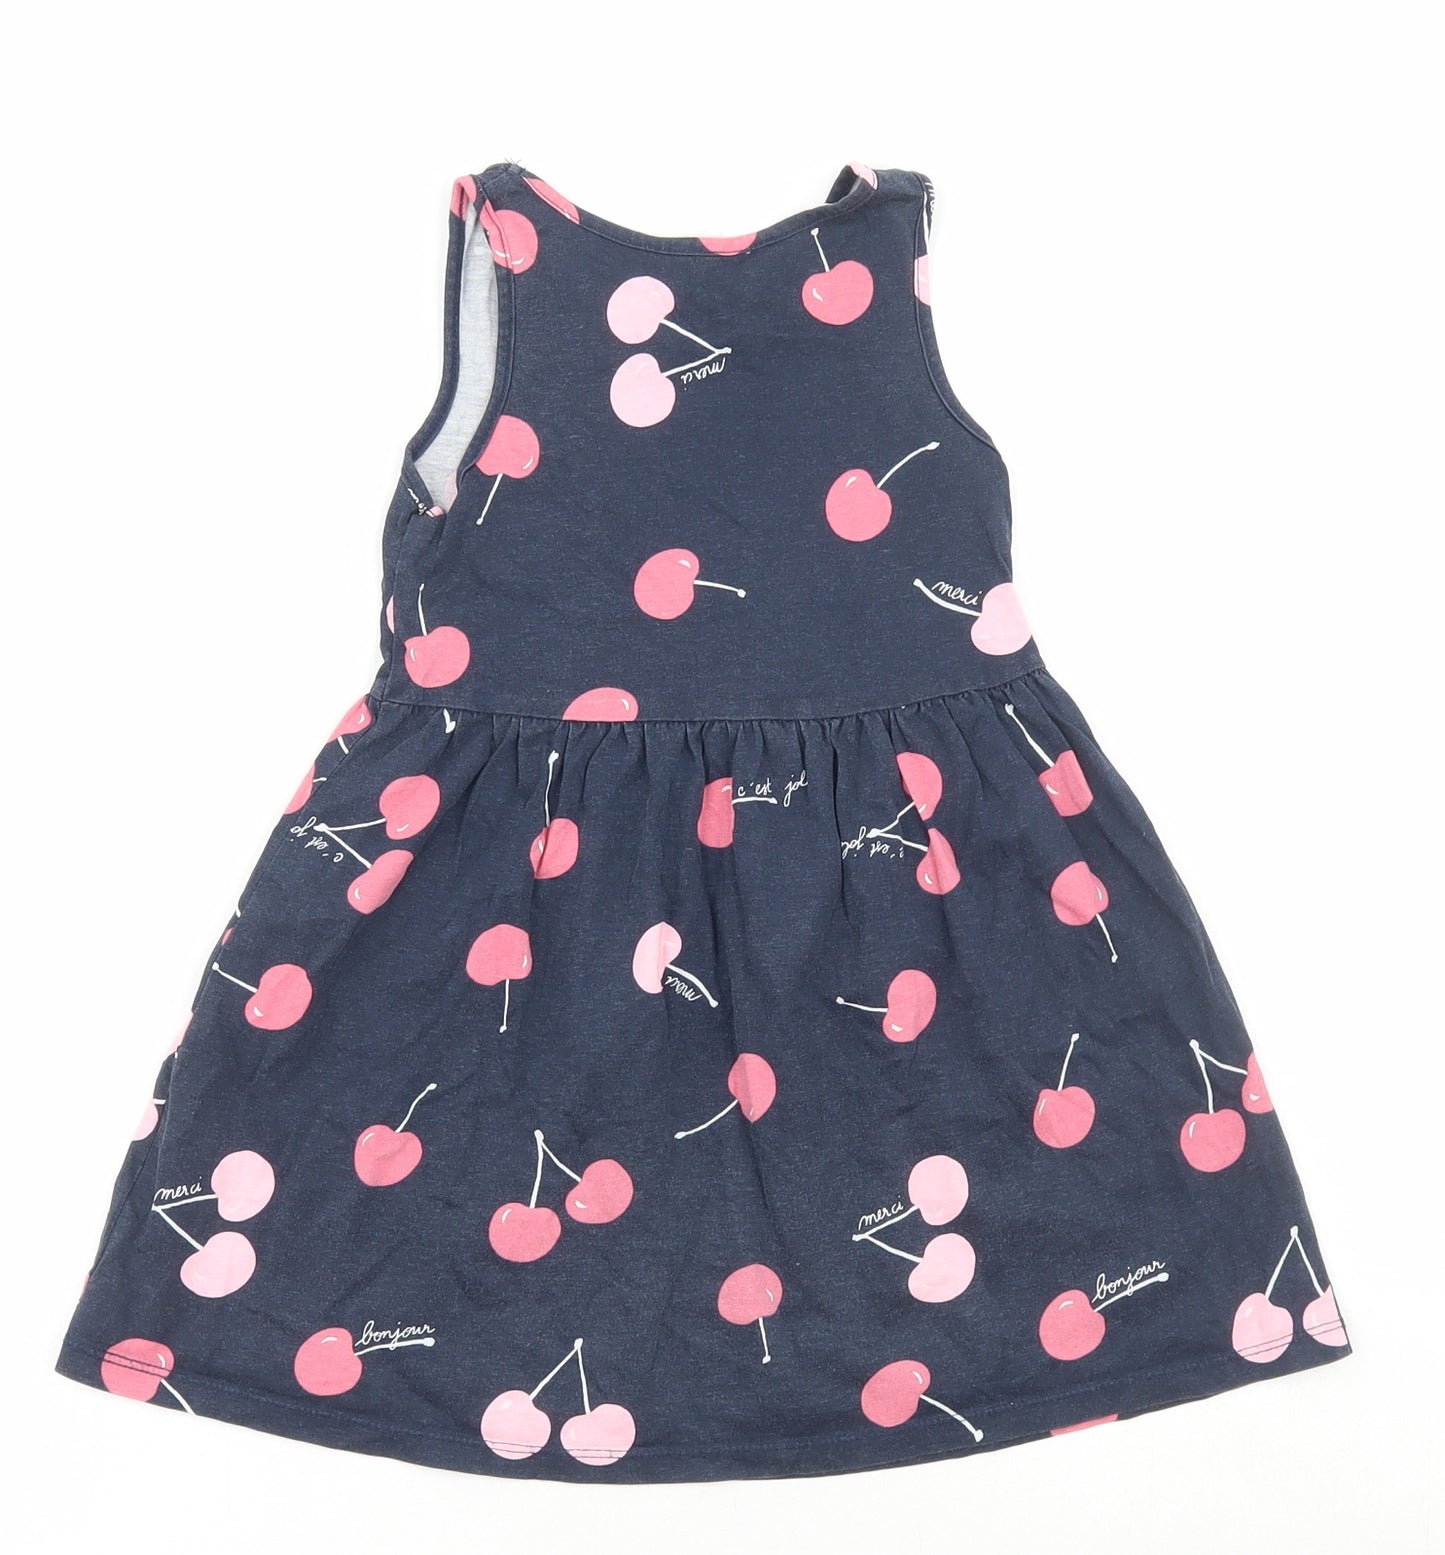 H&M Girls Blue Spotted Cotton Skater Dress Size 3-4 Years Round Neck